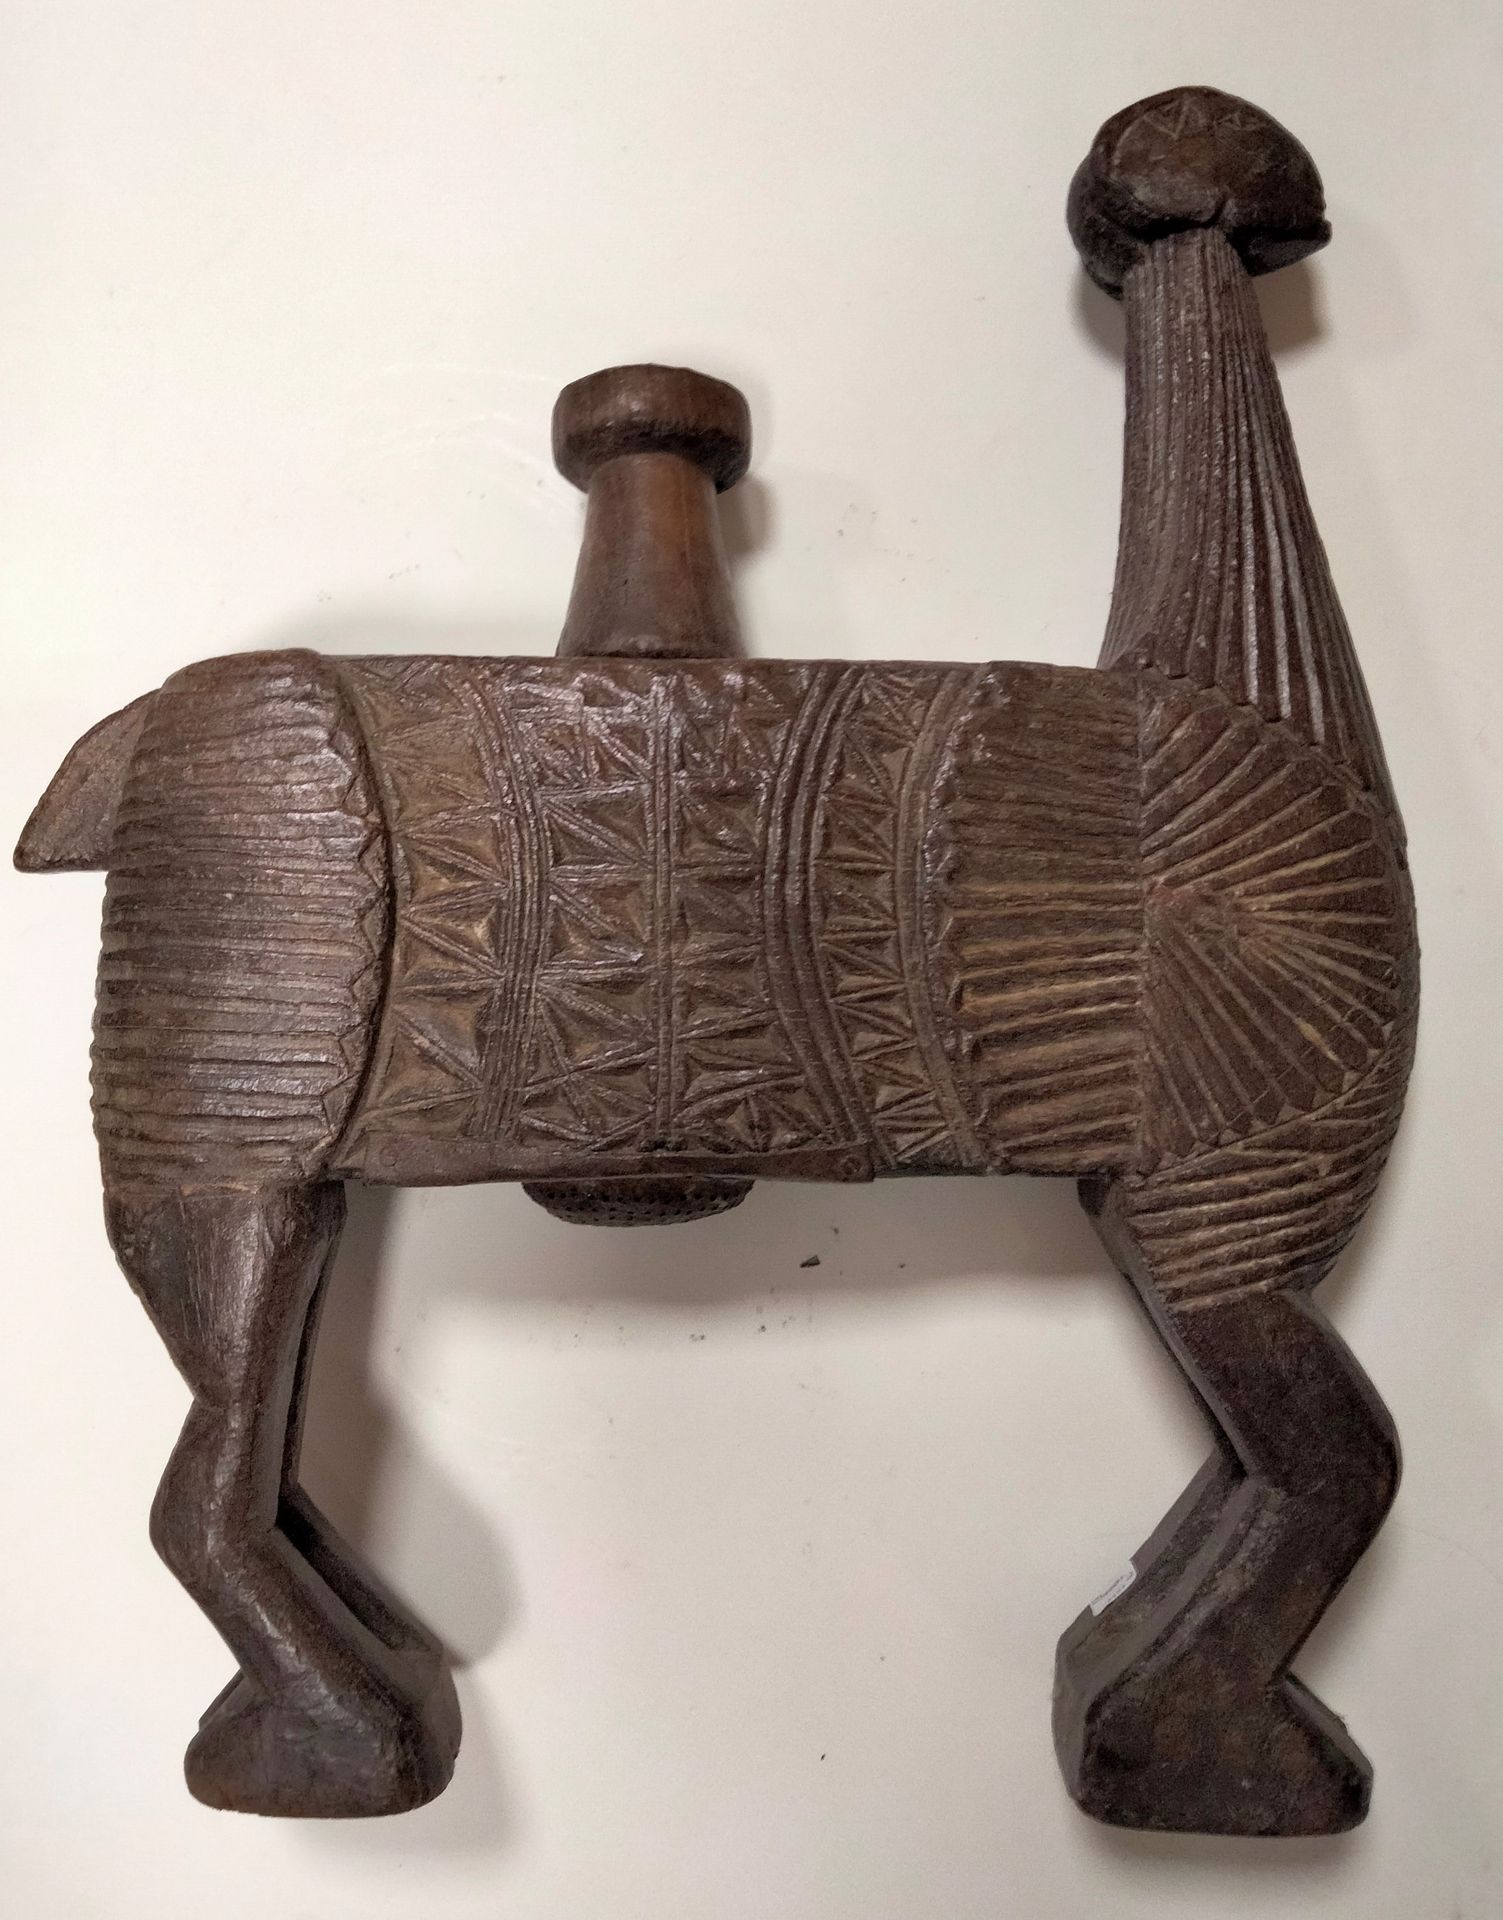 Null Carved wooden churn, Nepal, 20th centuryzoomorph
forming a ram. 
Dimensions&hellip;